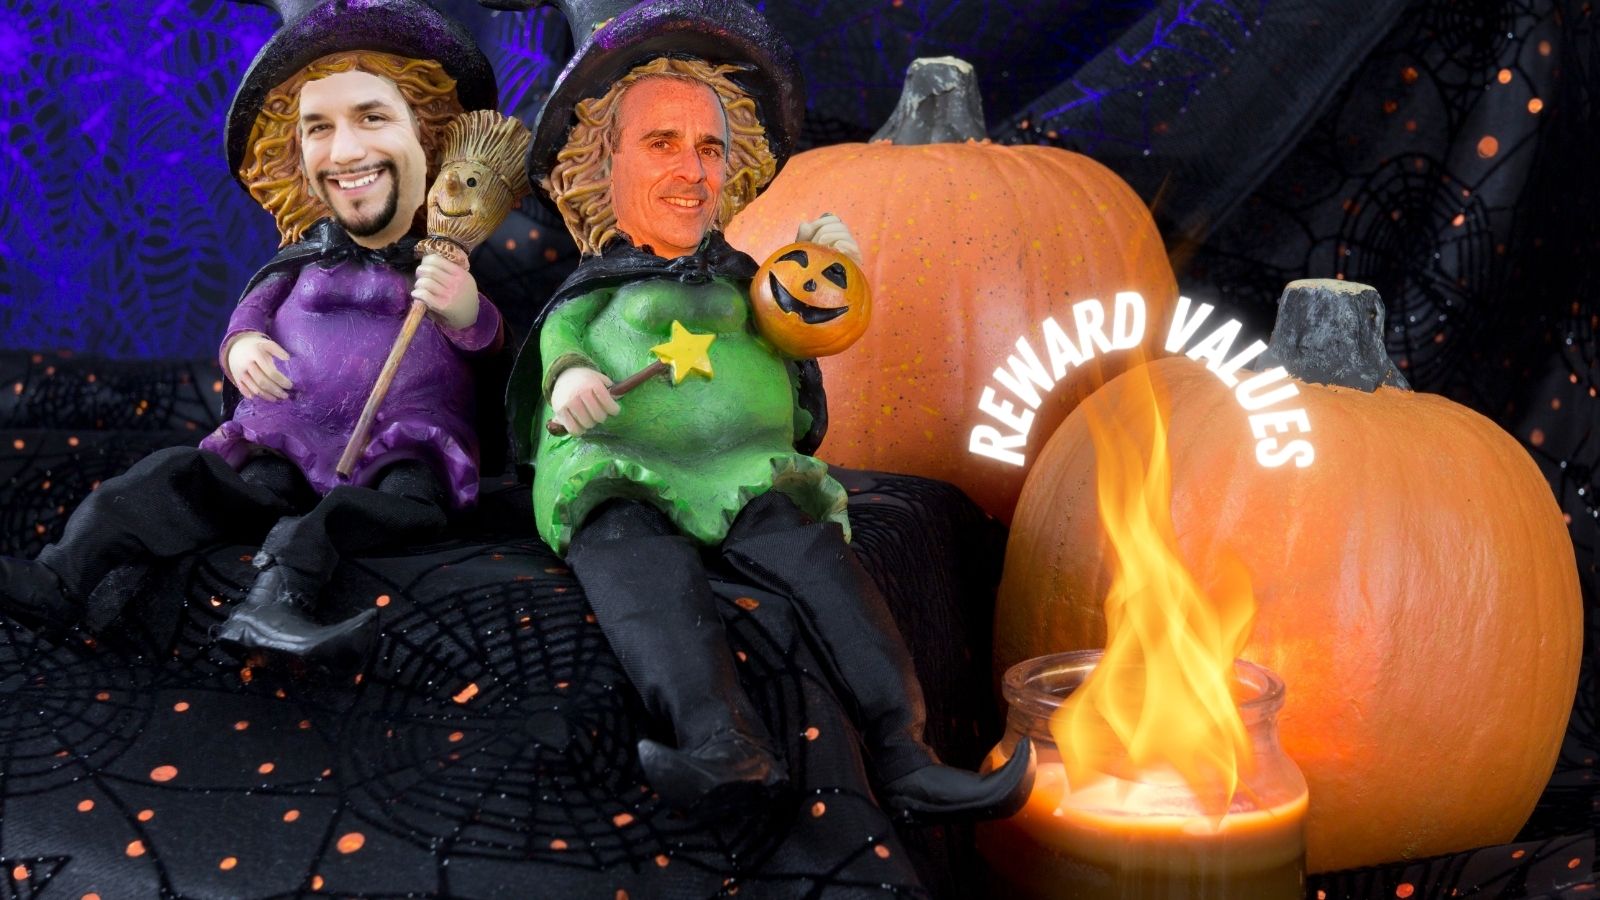 two men in clothing sitting on a couch with pumpkins and a candle